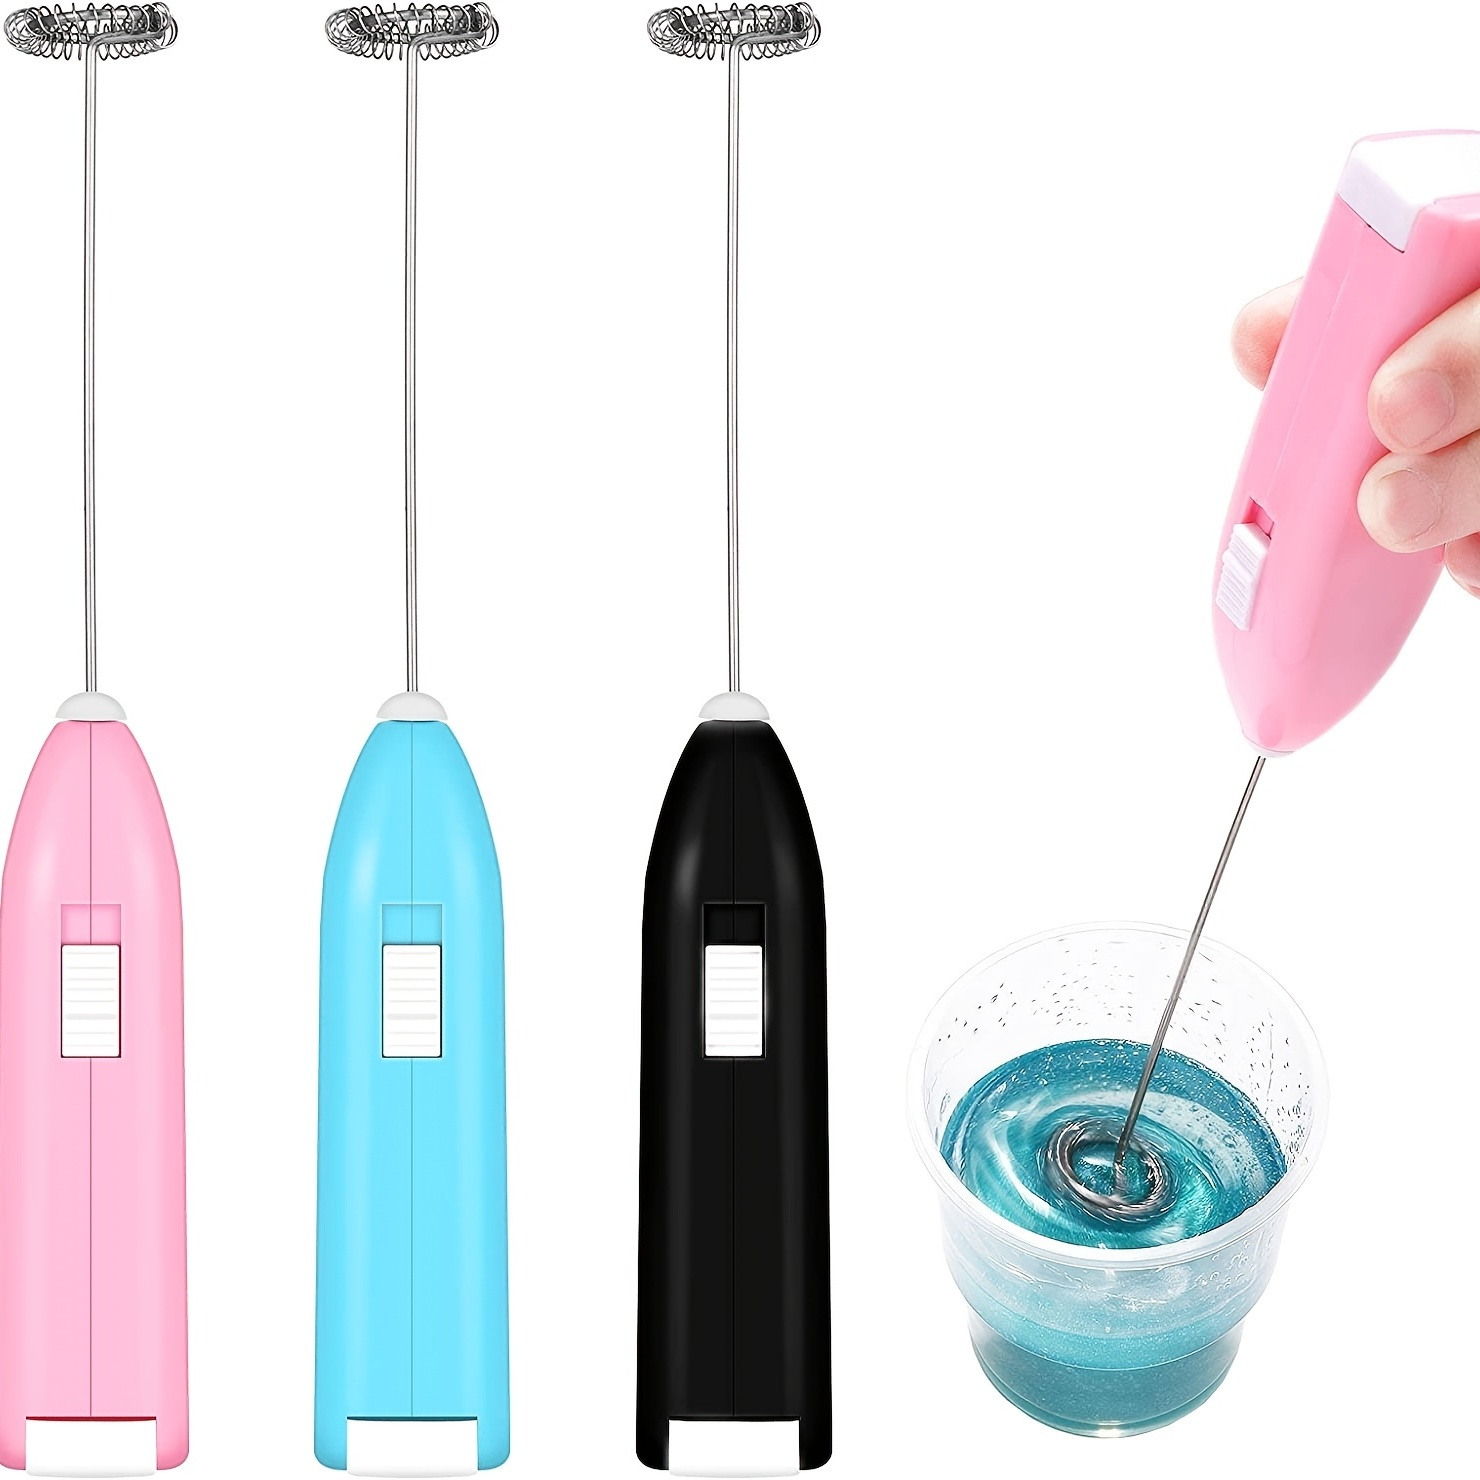 Resin Mixer, Handheld Electric Epoxy Mixer for Minimizing Bubbles, Epoxy  Resin Mixer Pro, Resin Stirrer for Paints, DIY Crafts Tumblers, Epoxy Resin